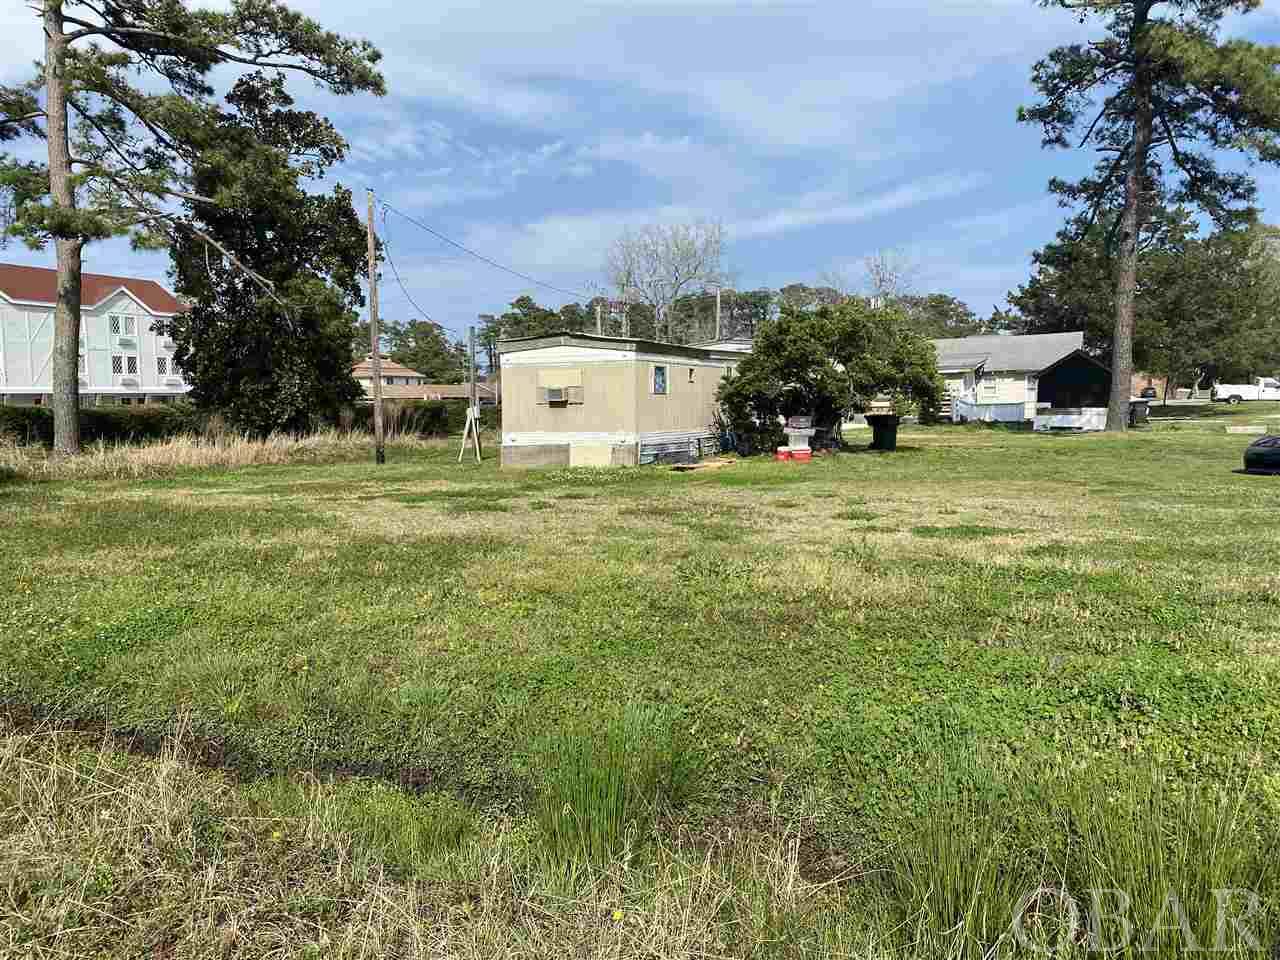 Lot is being leased by current tenant with mobile home.  Mobile home is not part of the sale.  You could continue to lease, if you wanted.  $275 trailer lot rental.